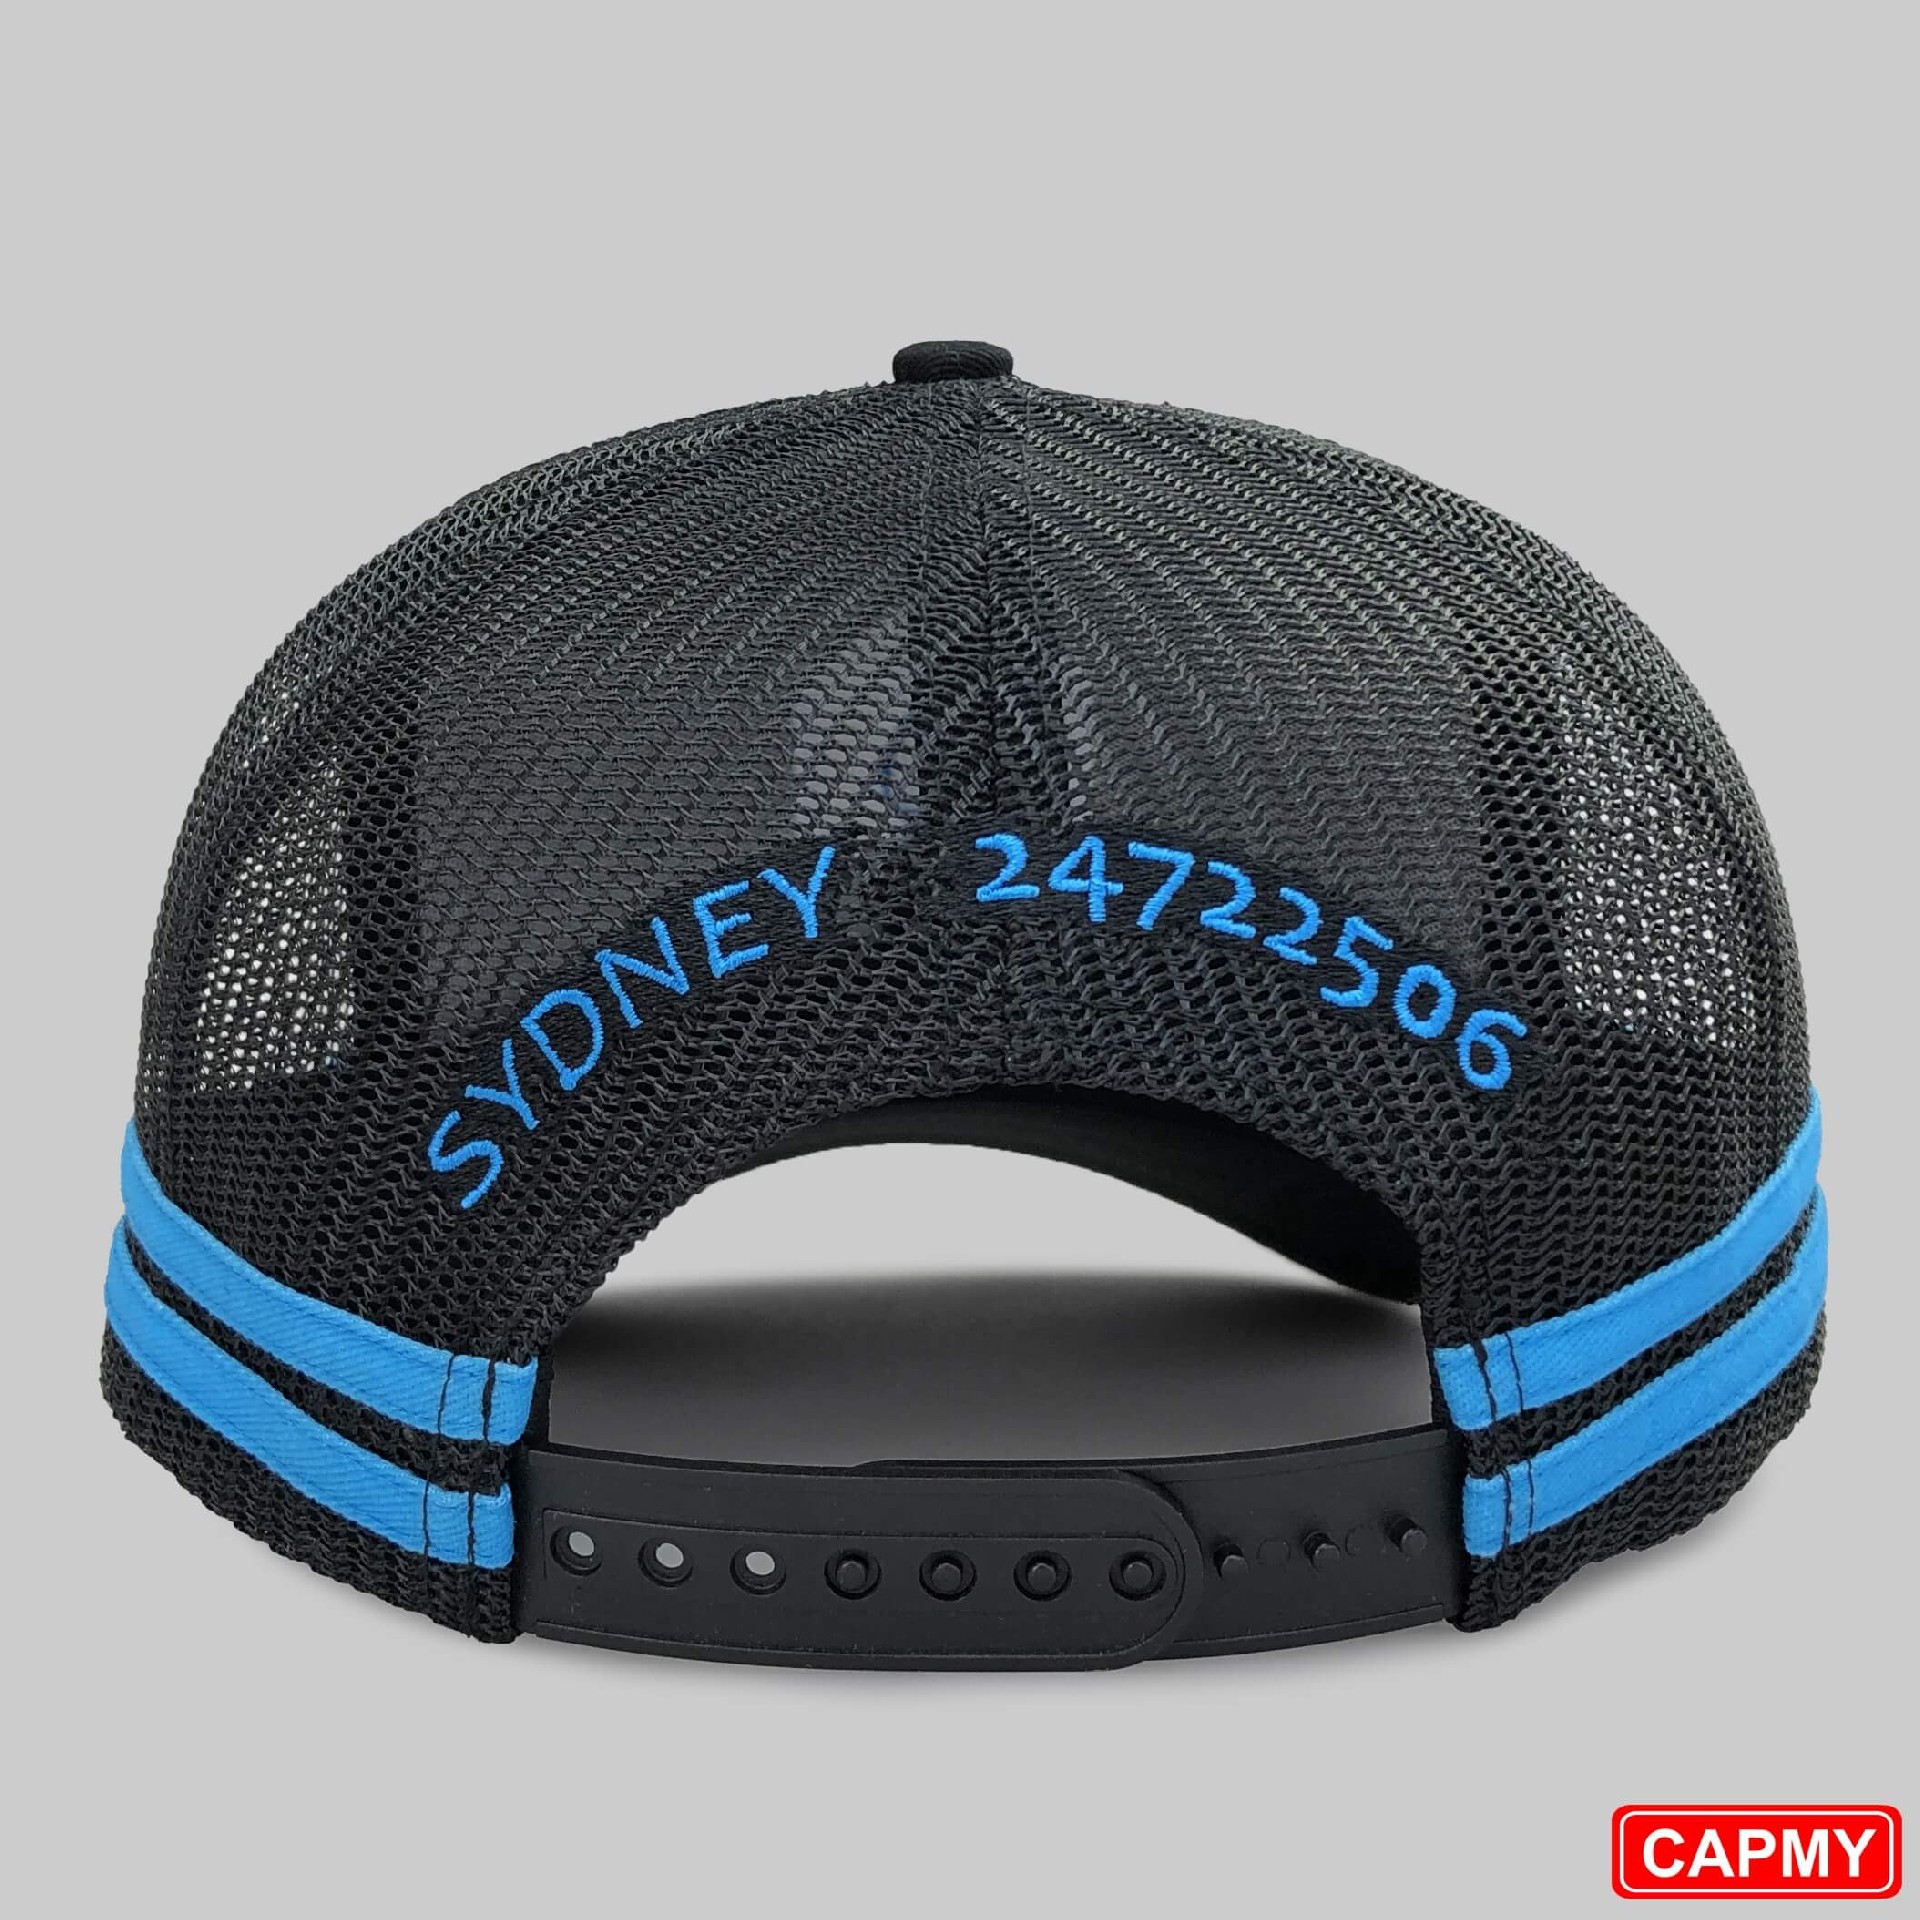 CTC-3001(Black Country Trucker Caps 3D Embroidery High Profile Wild  2 stripes Australian Country Trucker Caps Hats)